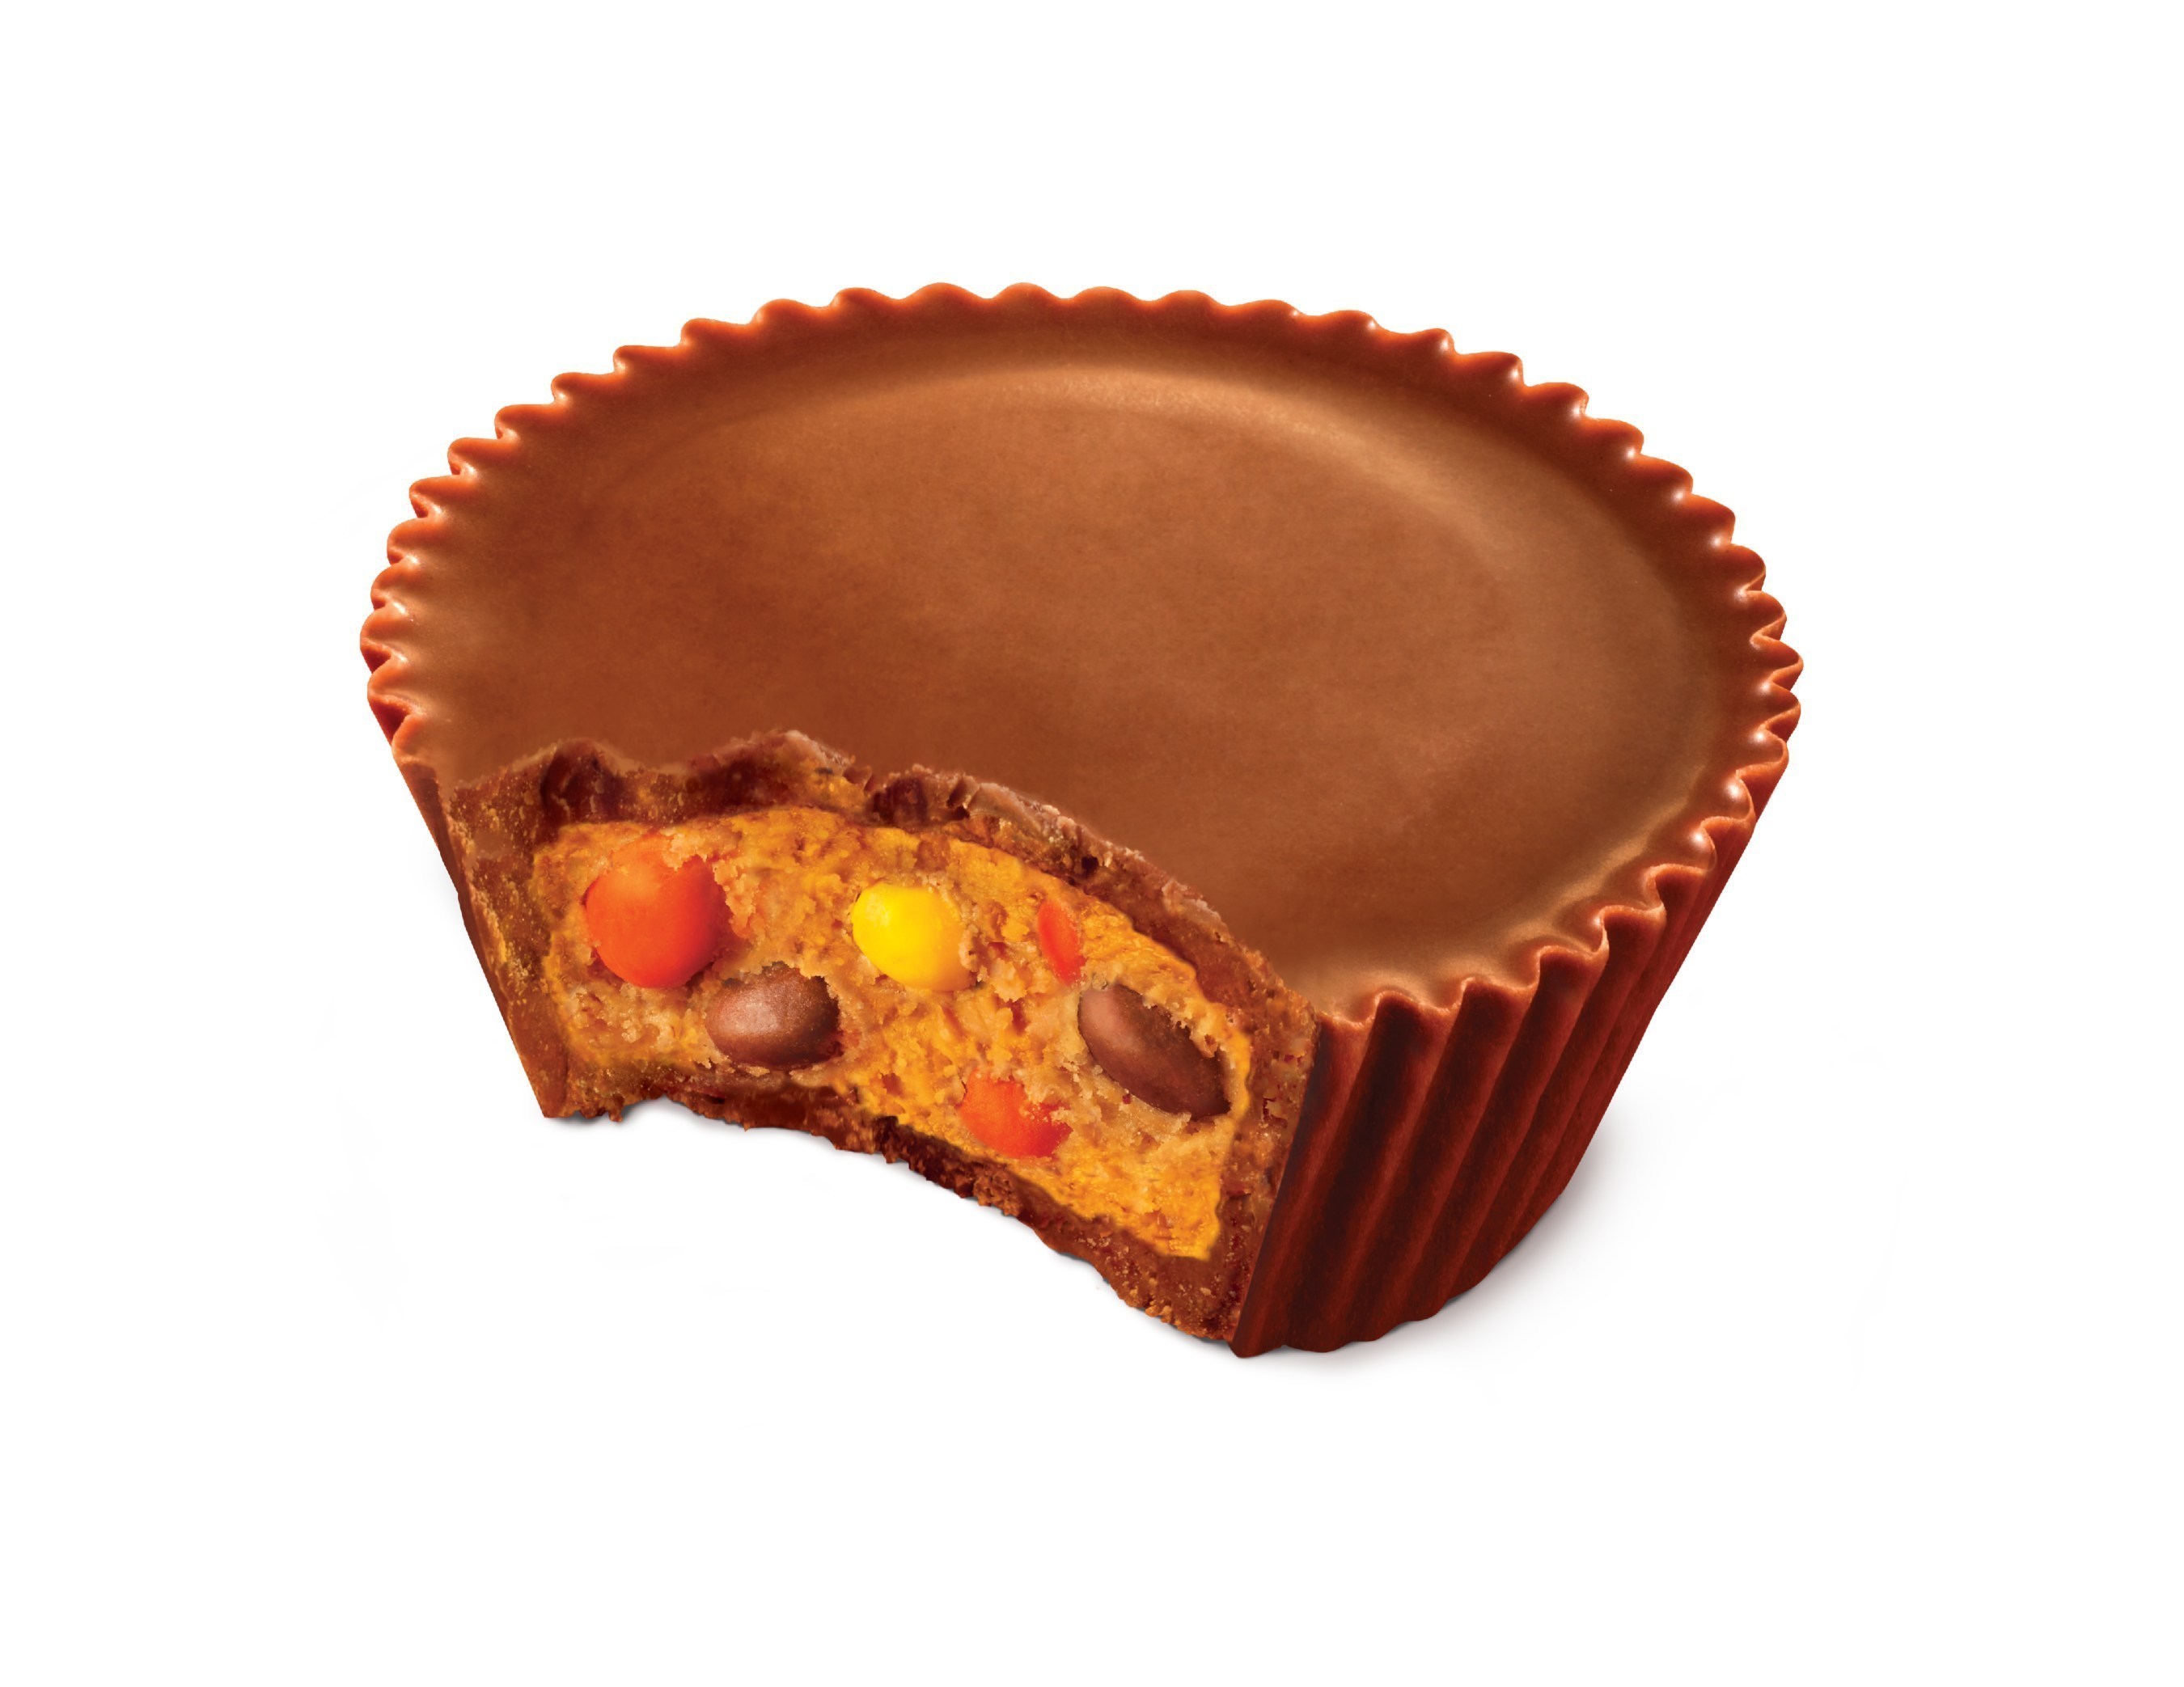 The Rumors Are True: Reese's Pieces Peanut Butter Cups To Launch